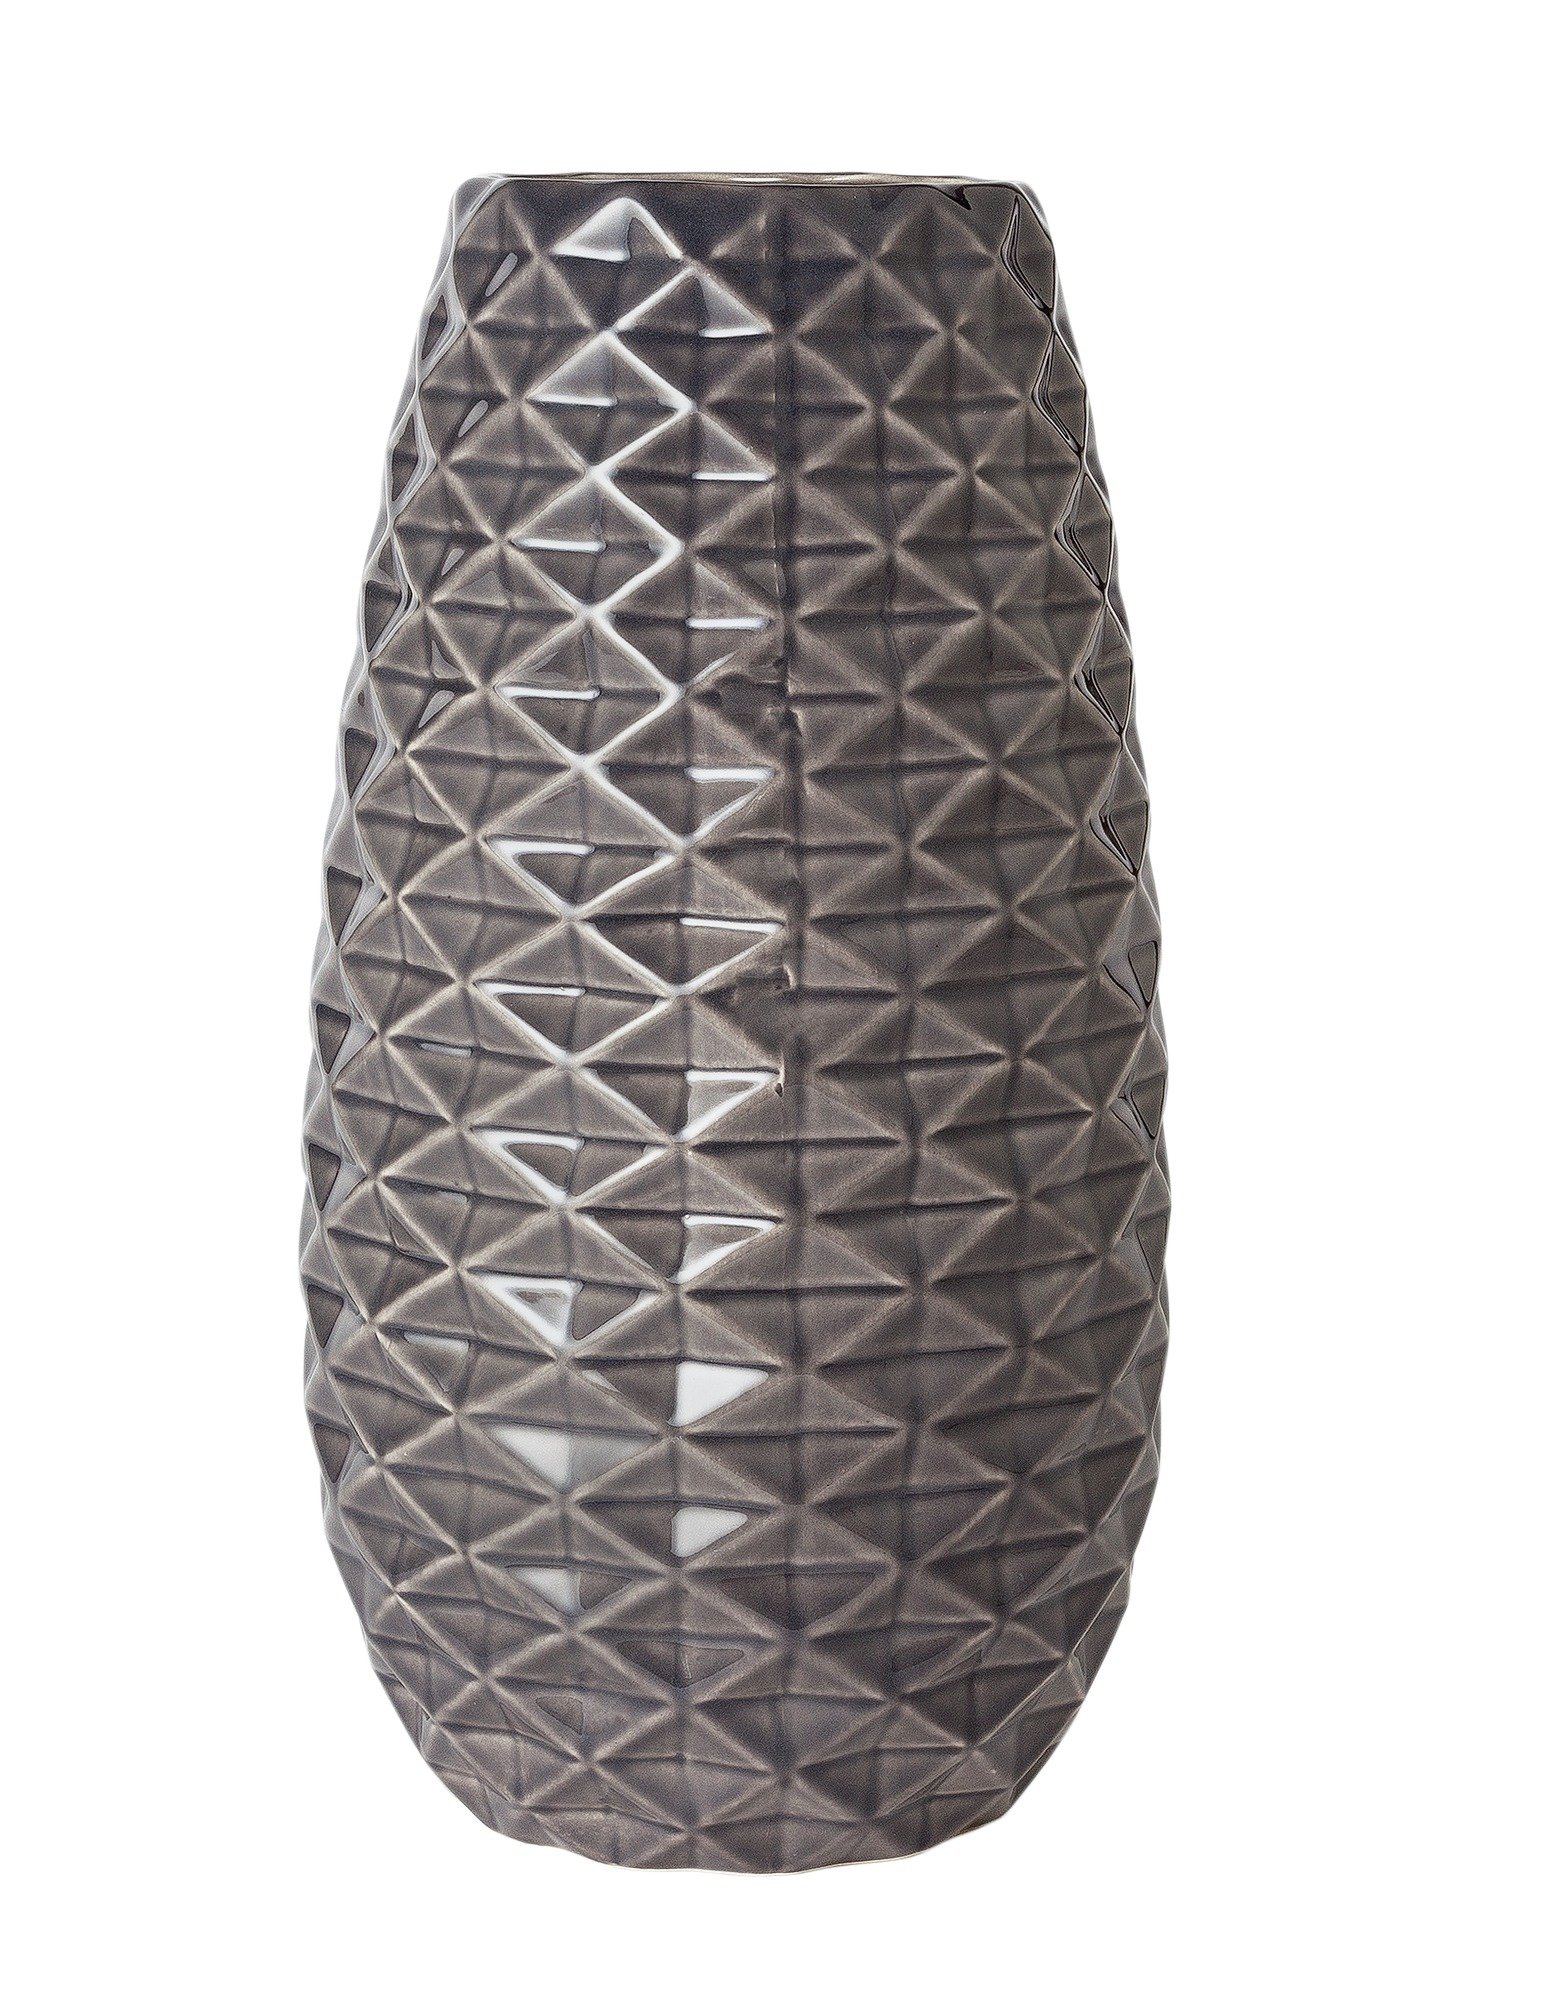 Discovery Textured Vase